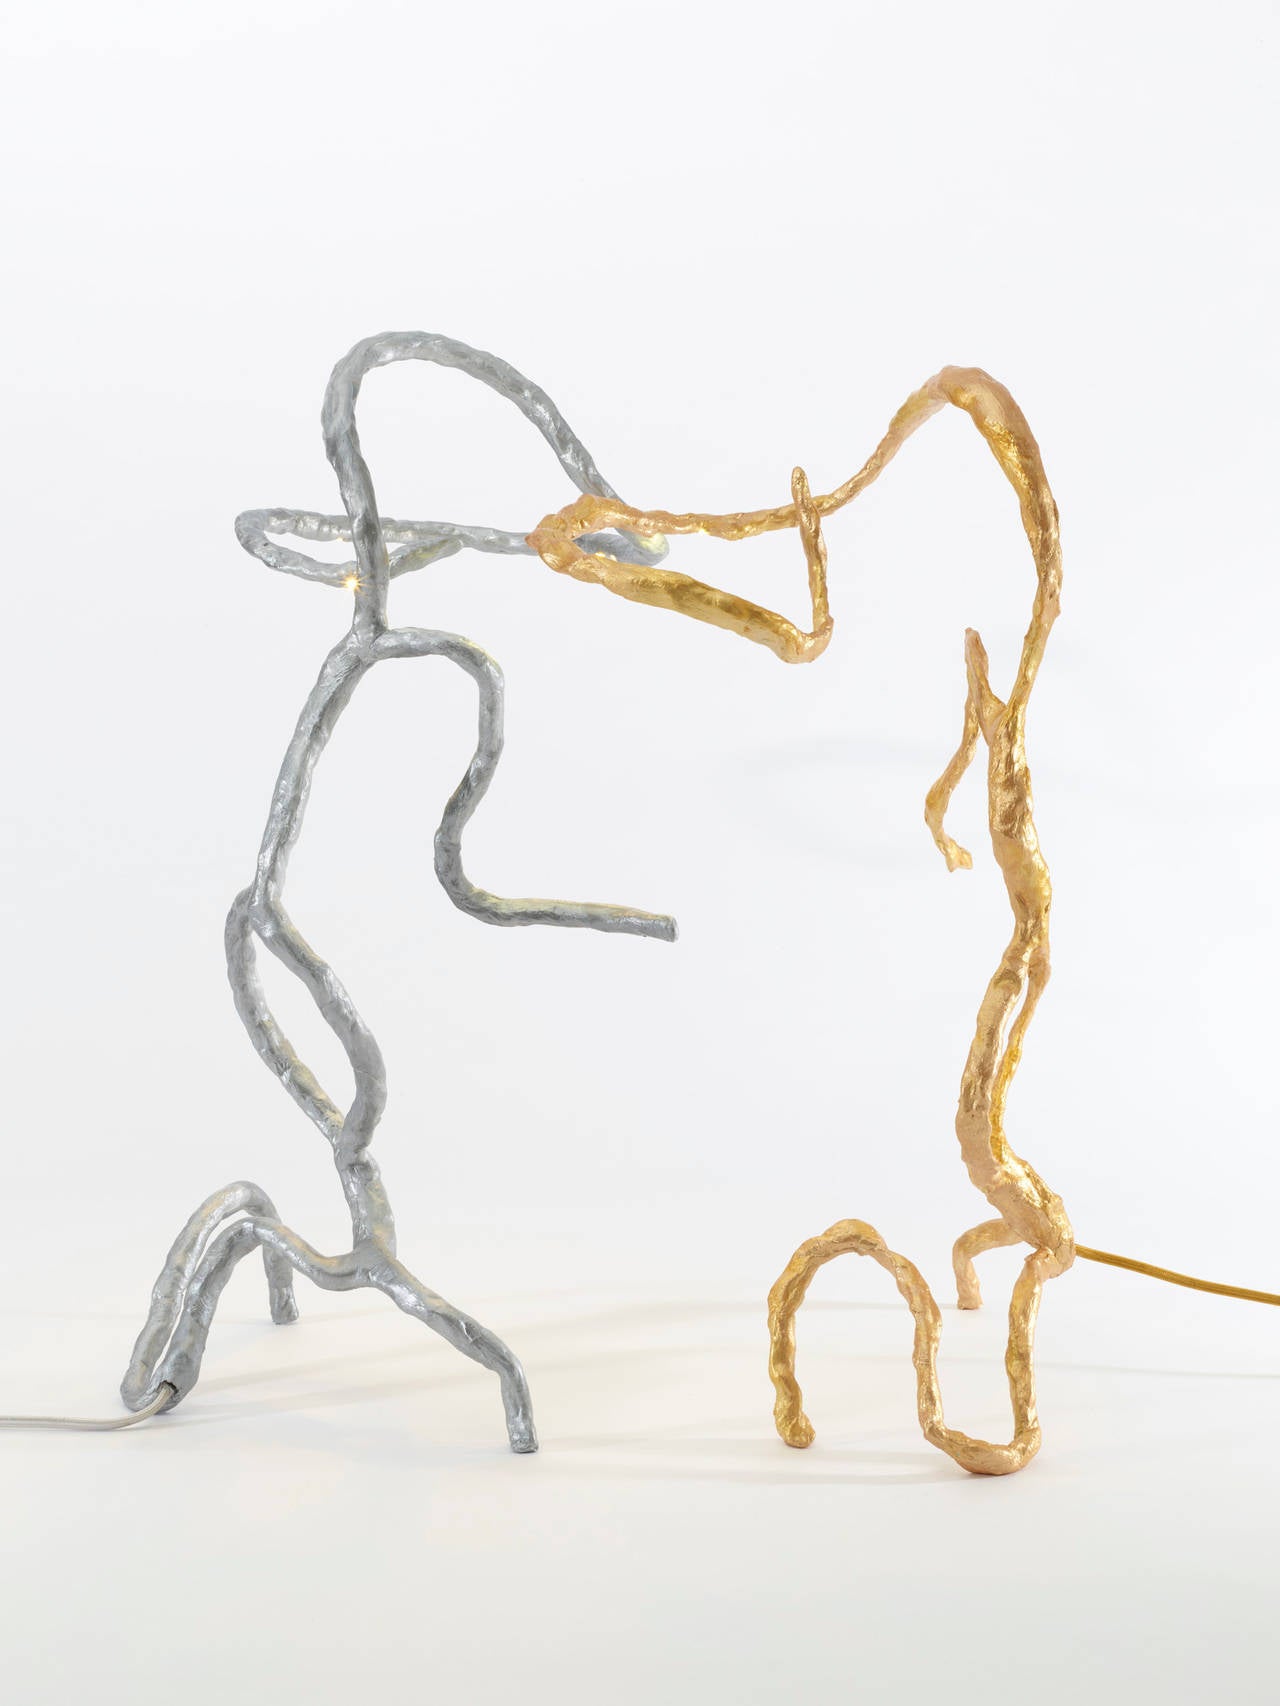 Marcia Grostein
With You (Silver) and Not With You (Gold), 2014
Resin, aluminum and LED lights
With You: Approx. 20 1/2 x 12 1/2 x 9 inches (52.1 x 31.8 x 22.9 cm), 9 V
Not WIth You: Approx. 11 x 10 x 19 1/4 inches (27.9 x 25.4 x 48.9 cm), 12